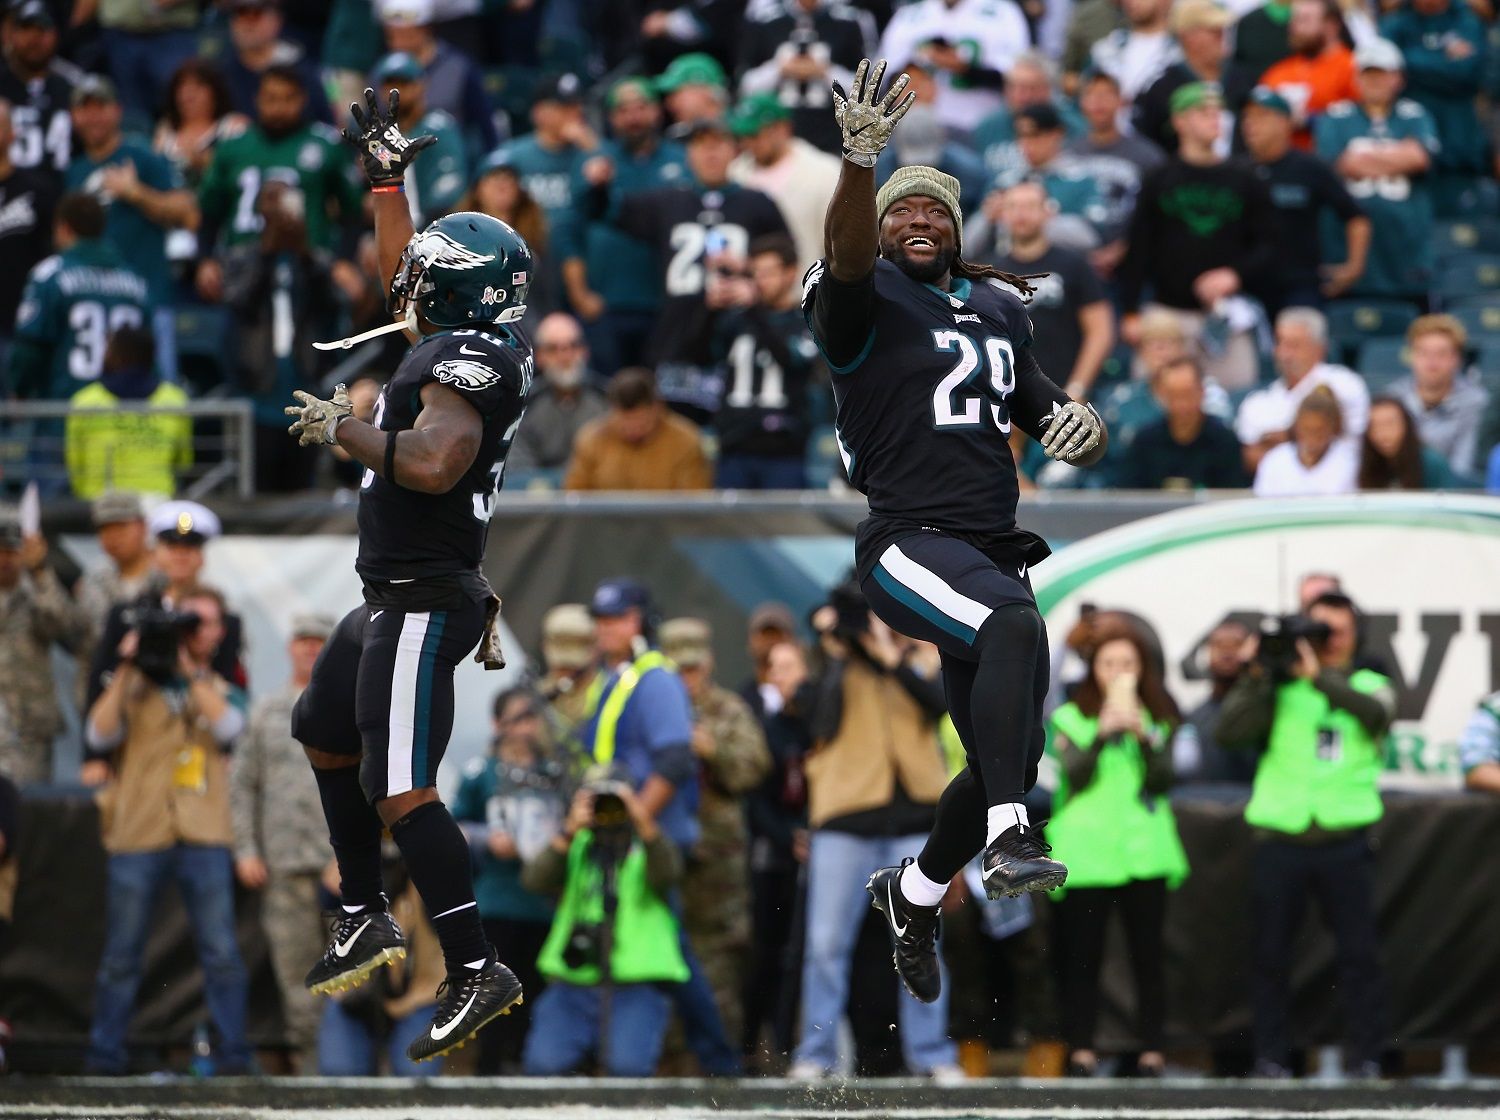 PHILADELPHIA, PA - NOVEMBER 05:  Running back Corey Clement #30 of the Philadelphia Eagles celebrates his touchdown with teammate running back LeGarrette Blount #29 during the fourth quarter against the Denver Broncos at Lincoln Financial Field on November 5, 2017 in Philadelphia, Pennsylvania. The Philadelphia Eagles won 51-23.  (Photo by Mitchell Leff/Getty Images)